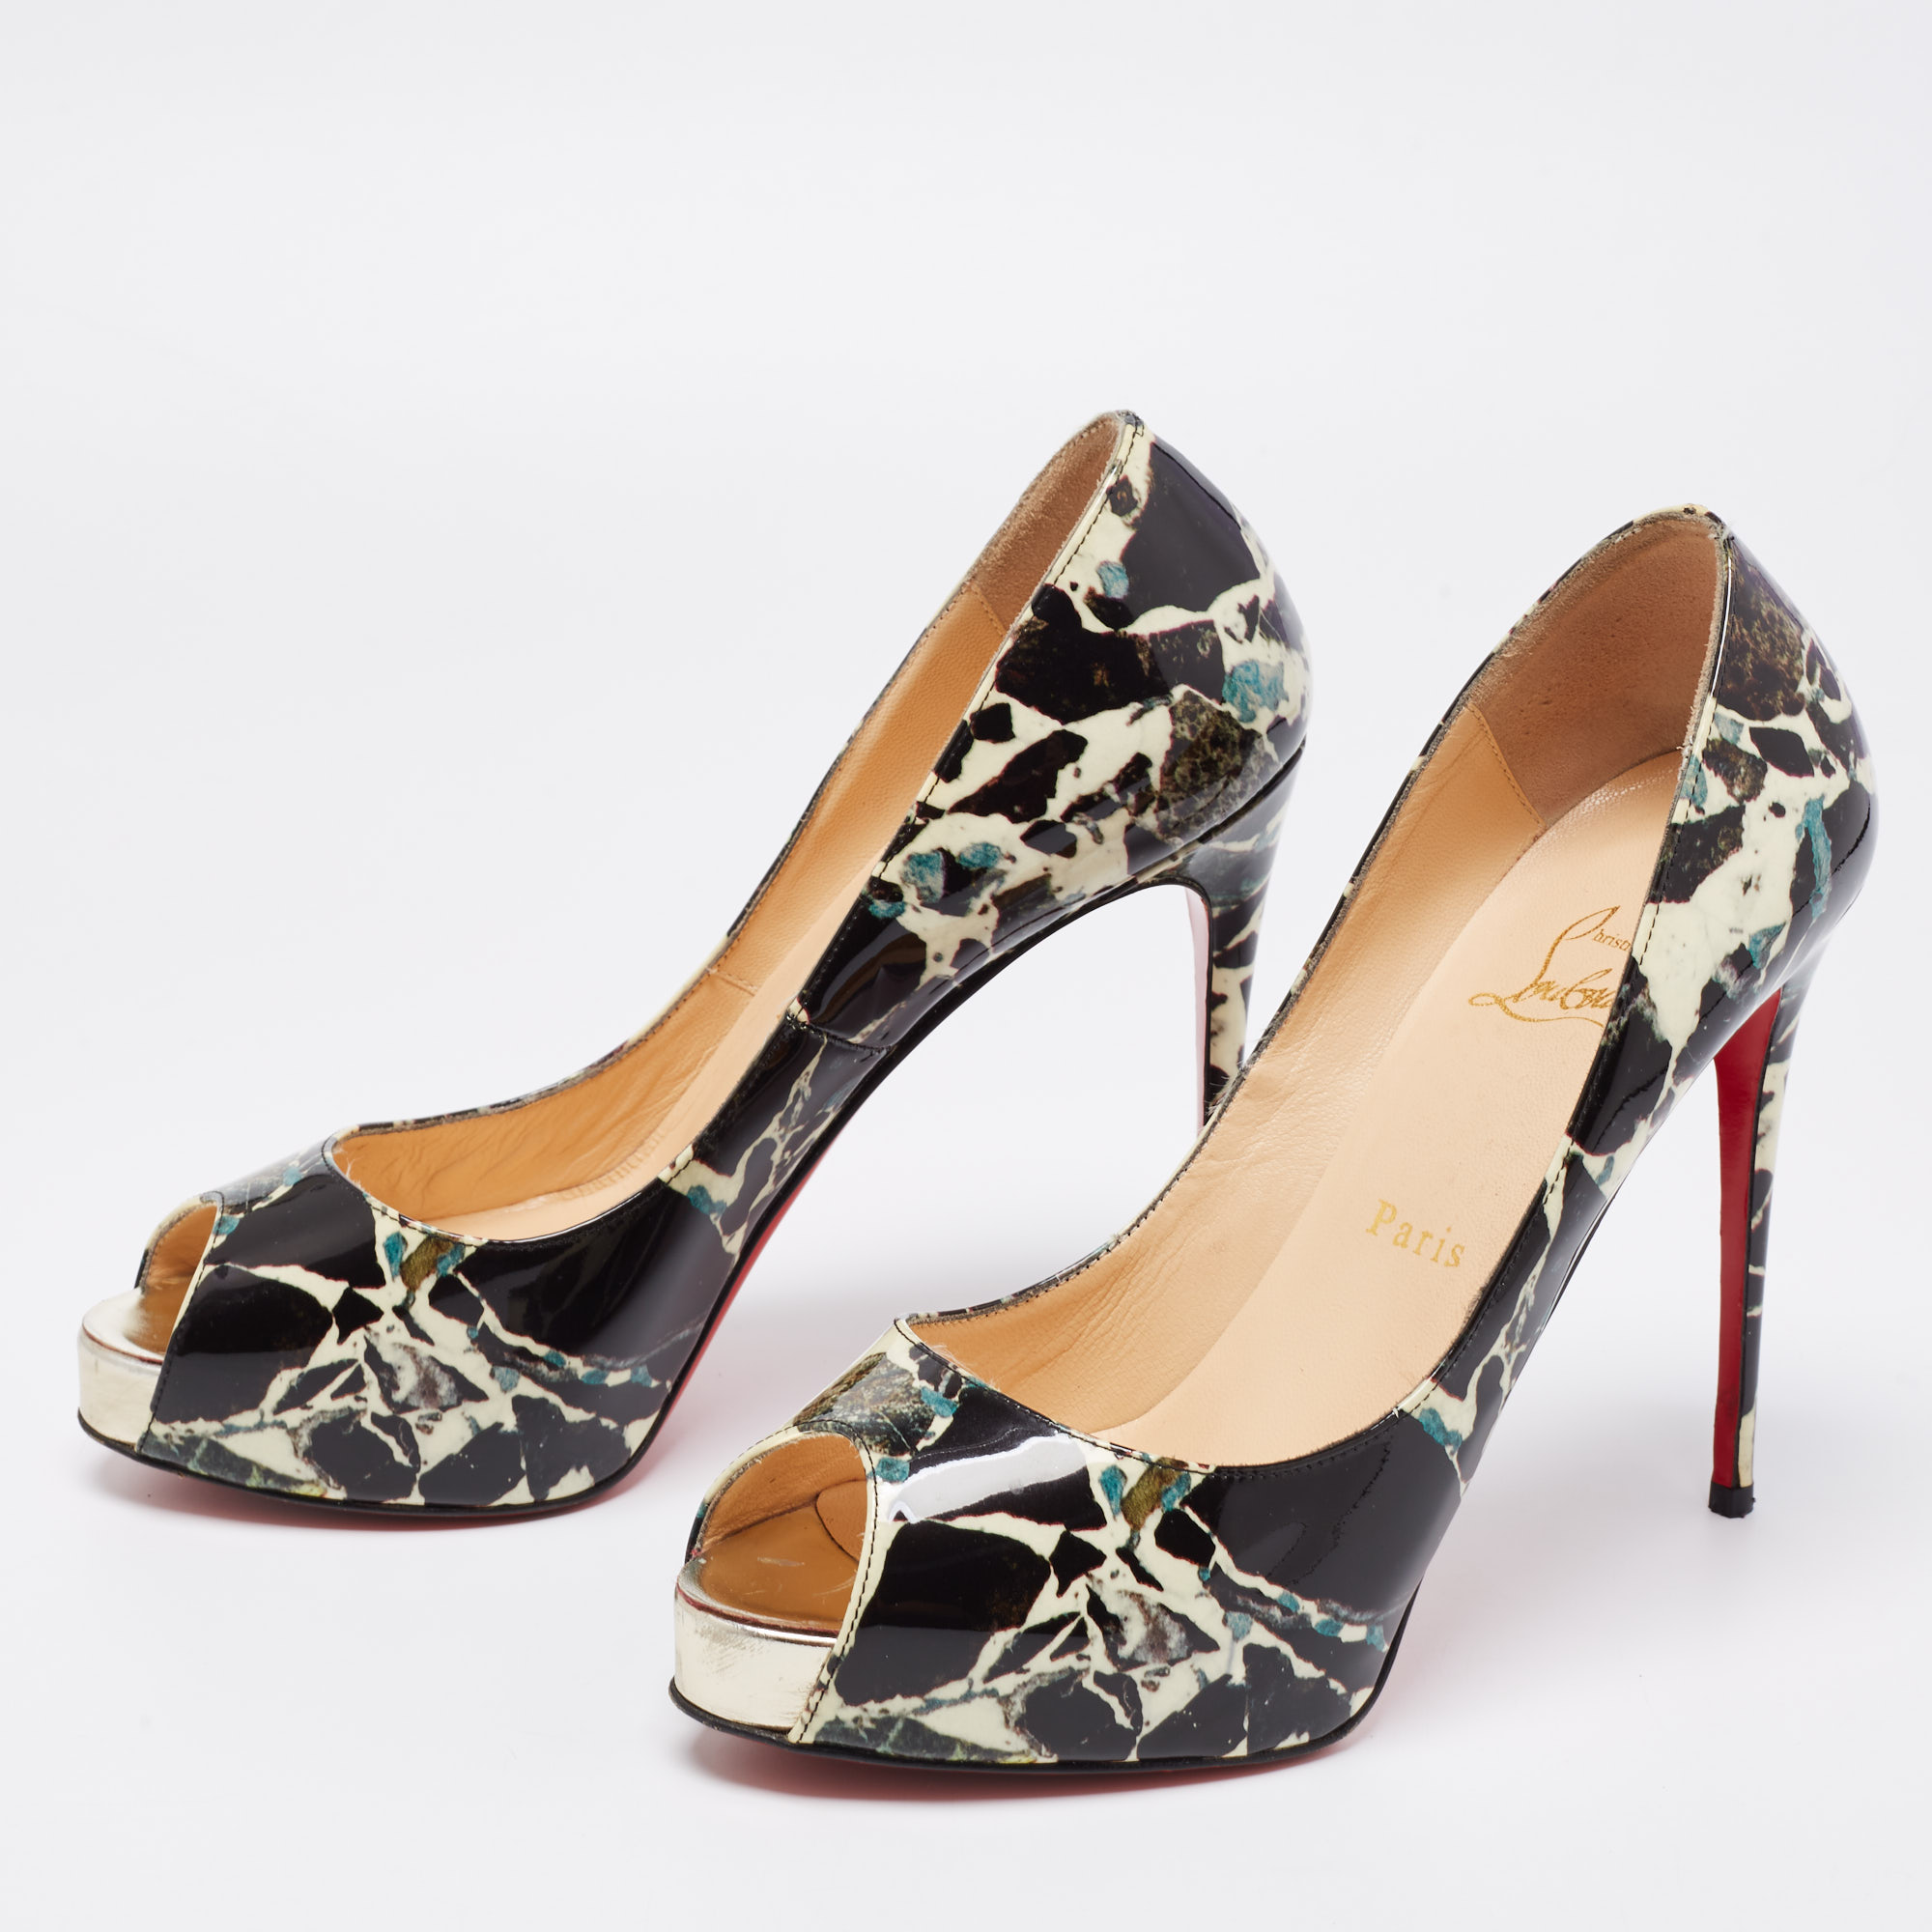 

Christian Louboutin Tri-Color Printed Patent Leather New Very Prive Peep-Toe Pumps Size, Black